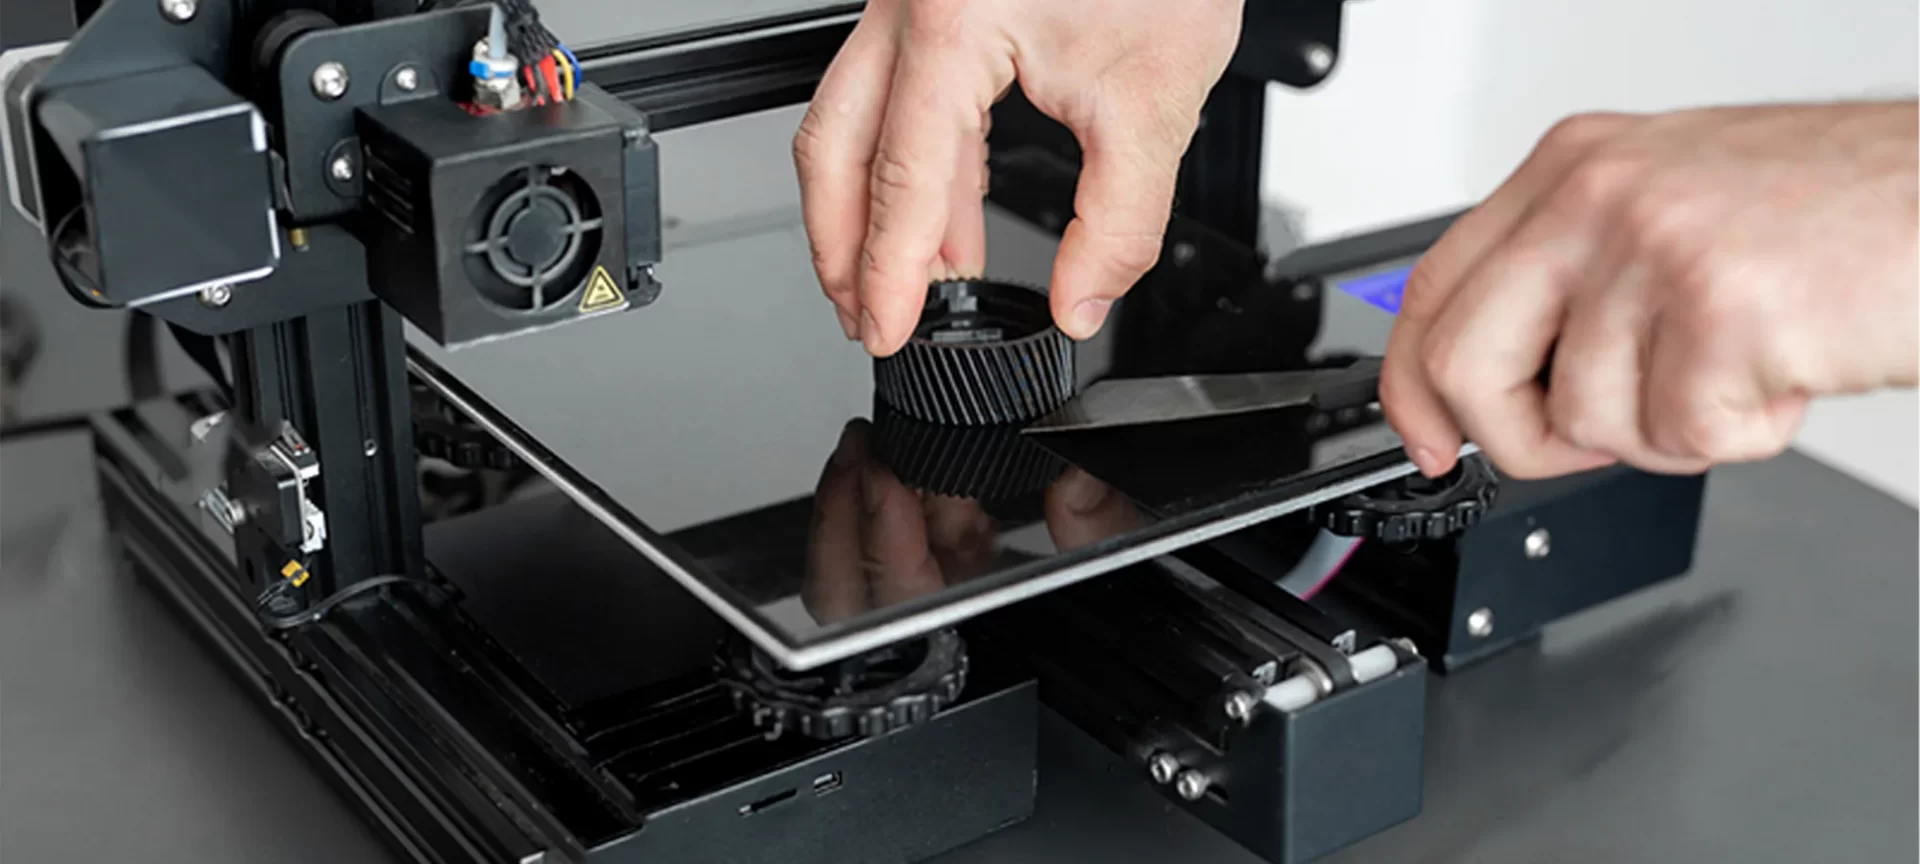 3D Print Sticking? Why Happens And How To Prevent It - Pick 3D Printer